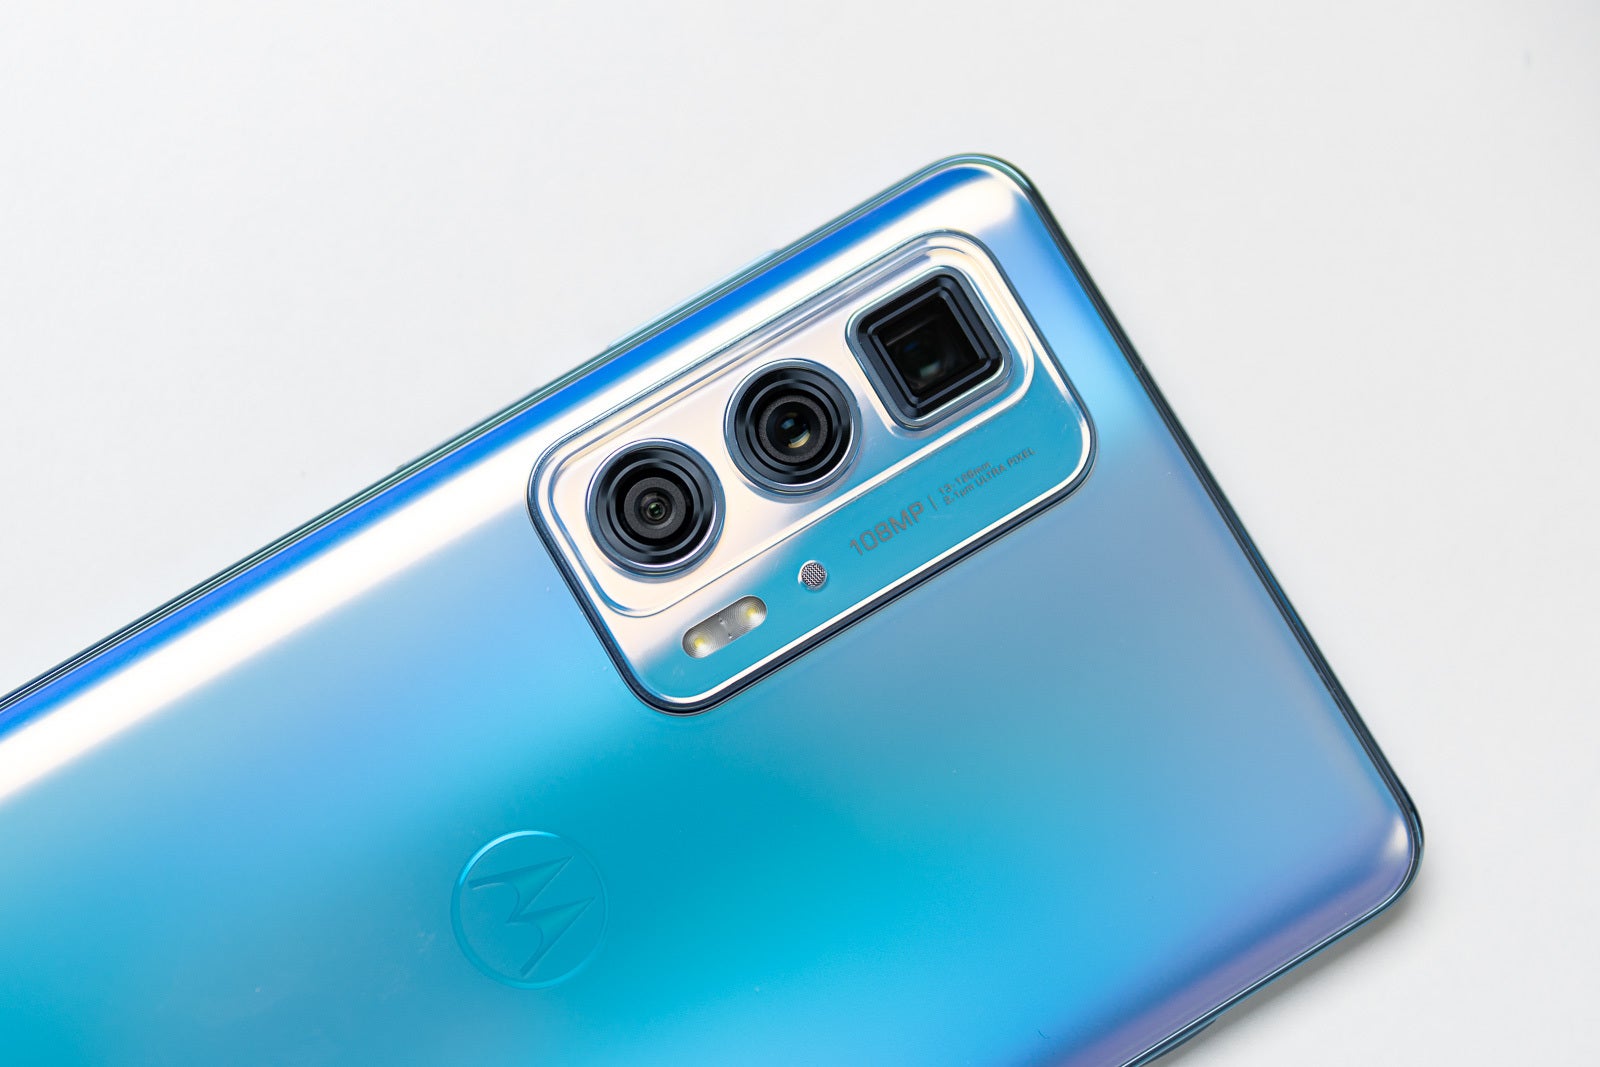 The Edge 20 Pro is one of the few Motorola phones to feature a high-end camera set. - Is Motorola afraid of competing with Samsung and Apple? The confusing tale of how not to make a flagship